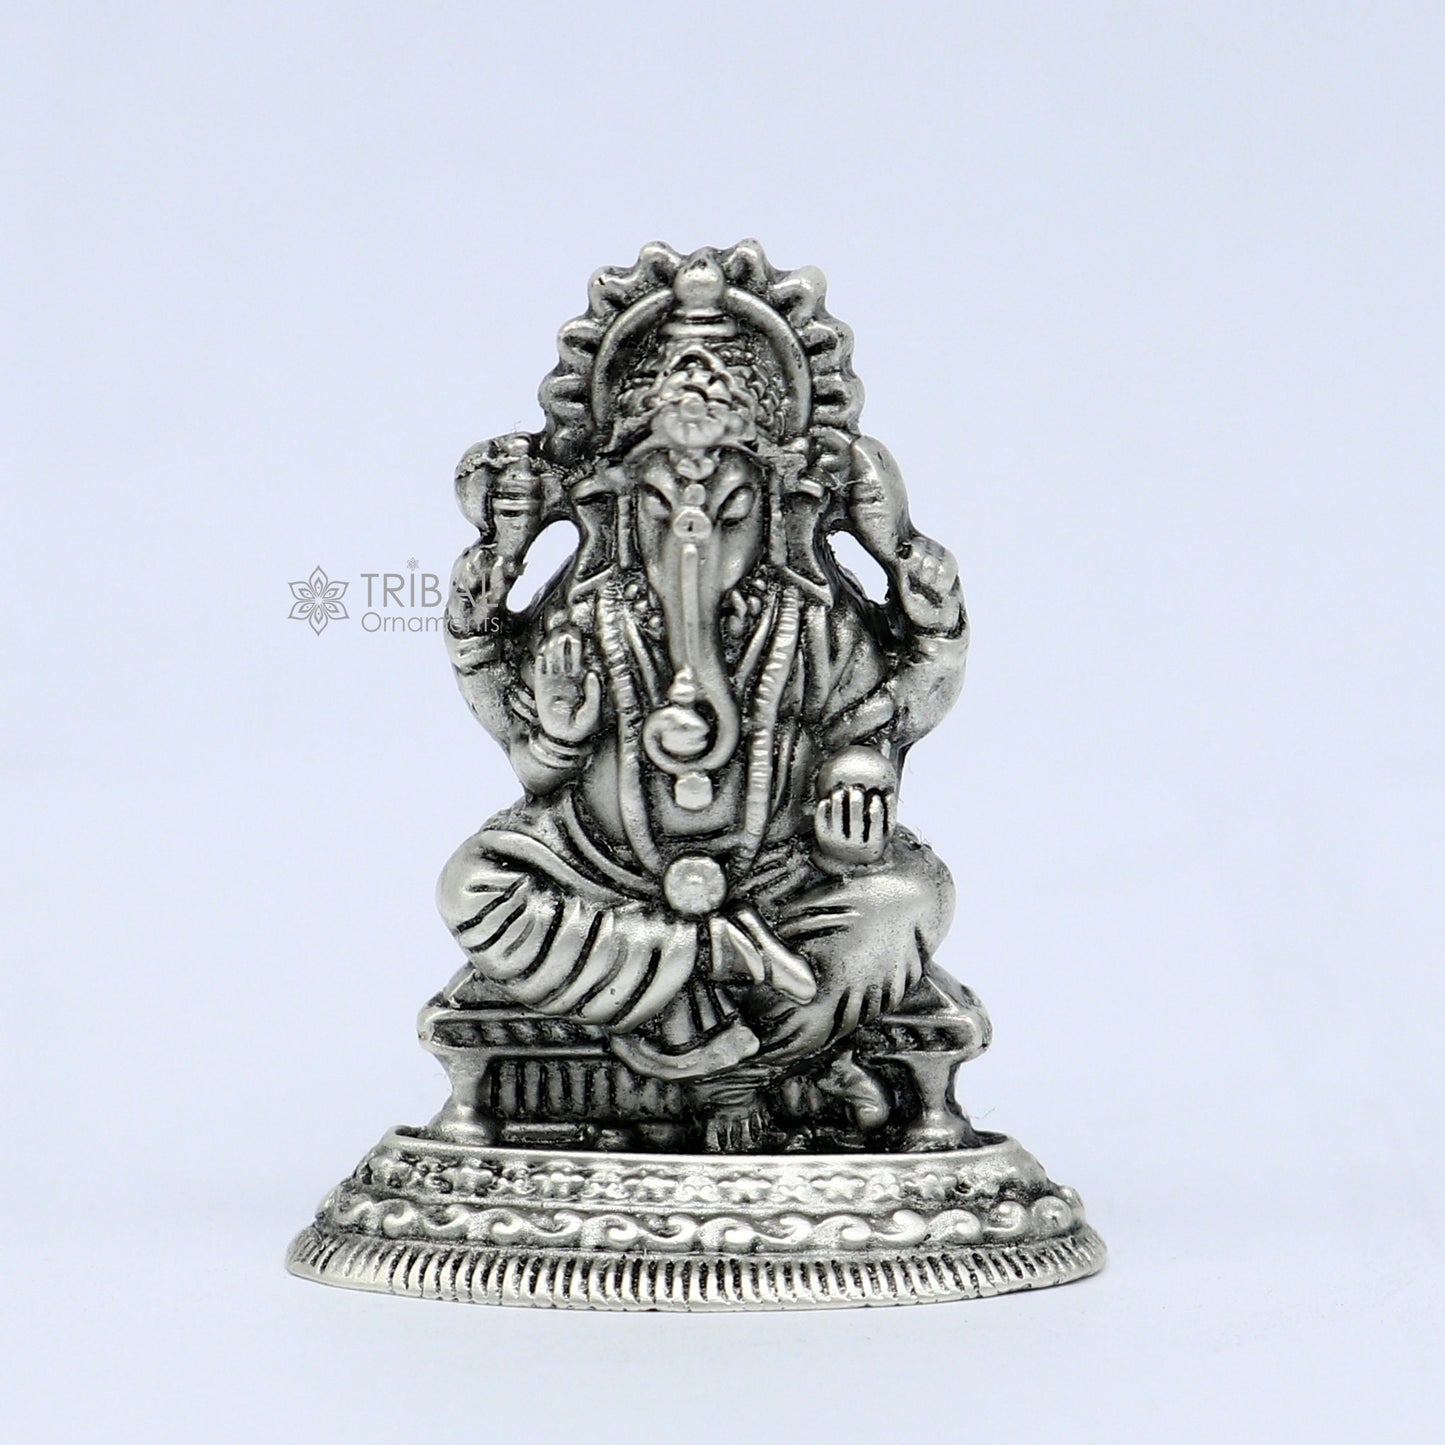 925 Sterling silver Divine lord idol Ganesha statue art, best puja figurine for home temple for wealth and prosperity art731 - TRIBAL ORNAMENTS